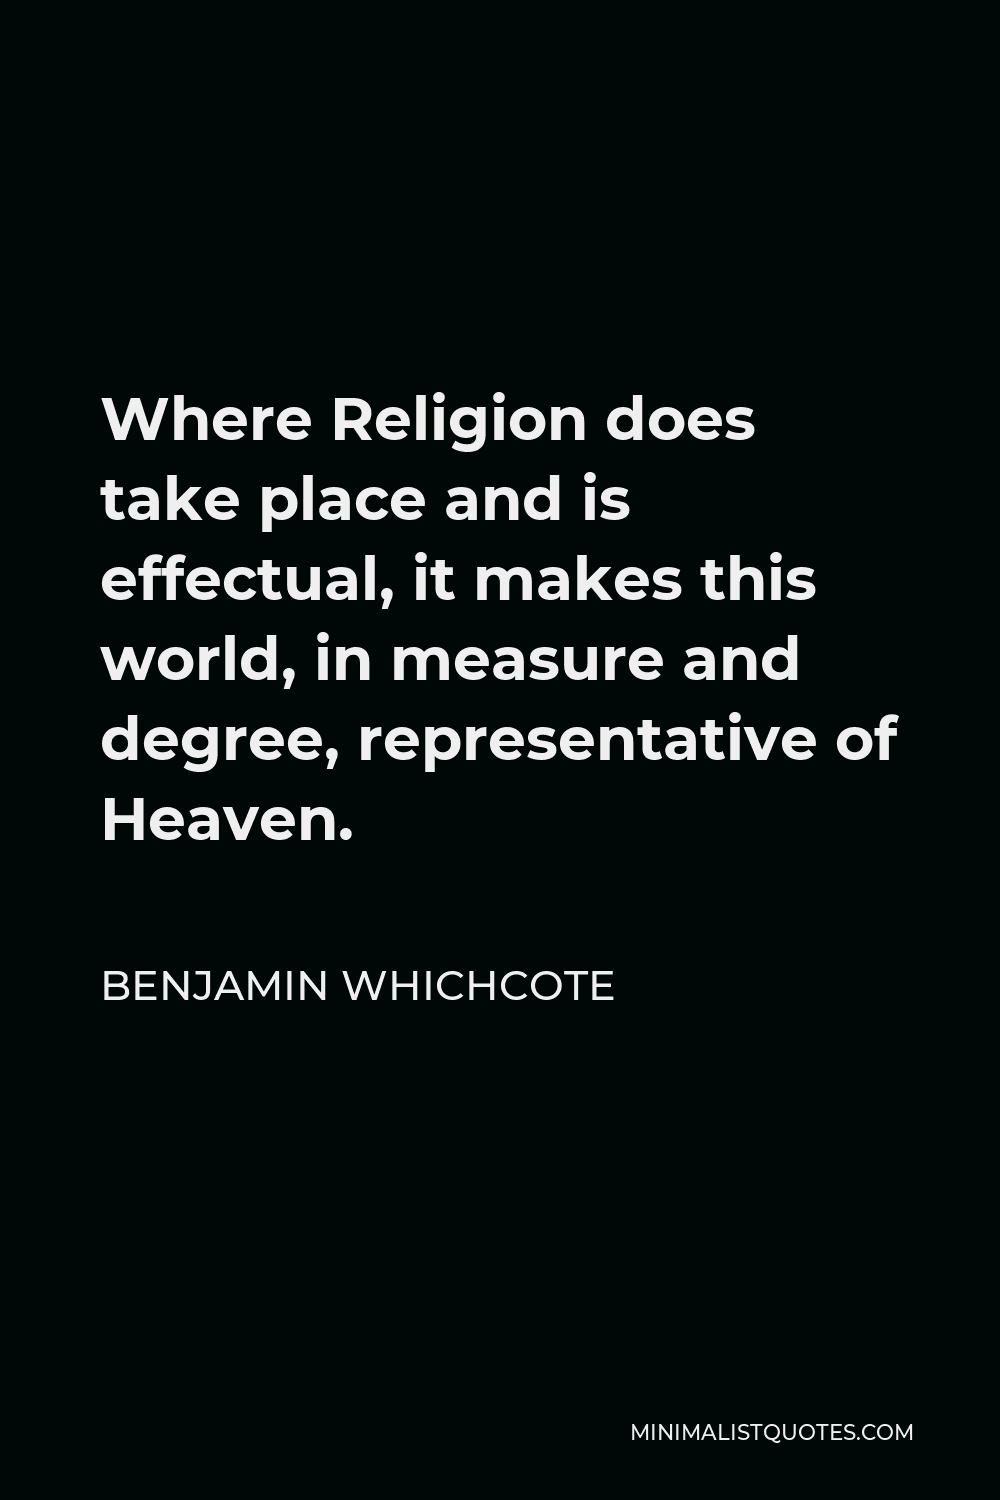 Benjamin Whichcote Quote - Where Religion does take place and is effectual, it makes this world, in measure and degree, representative of Heaven.